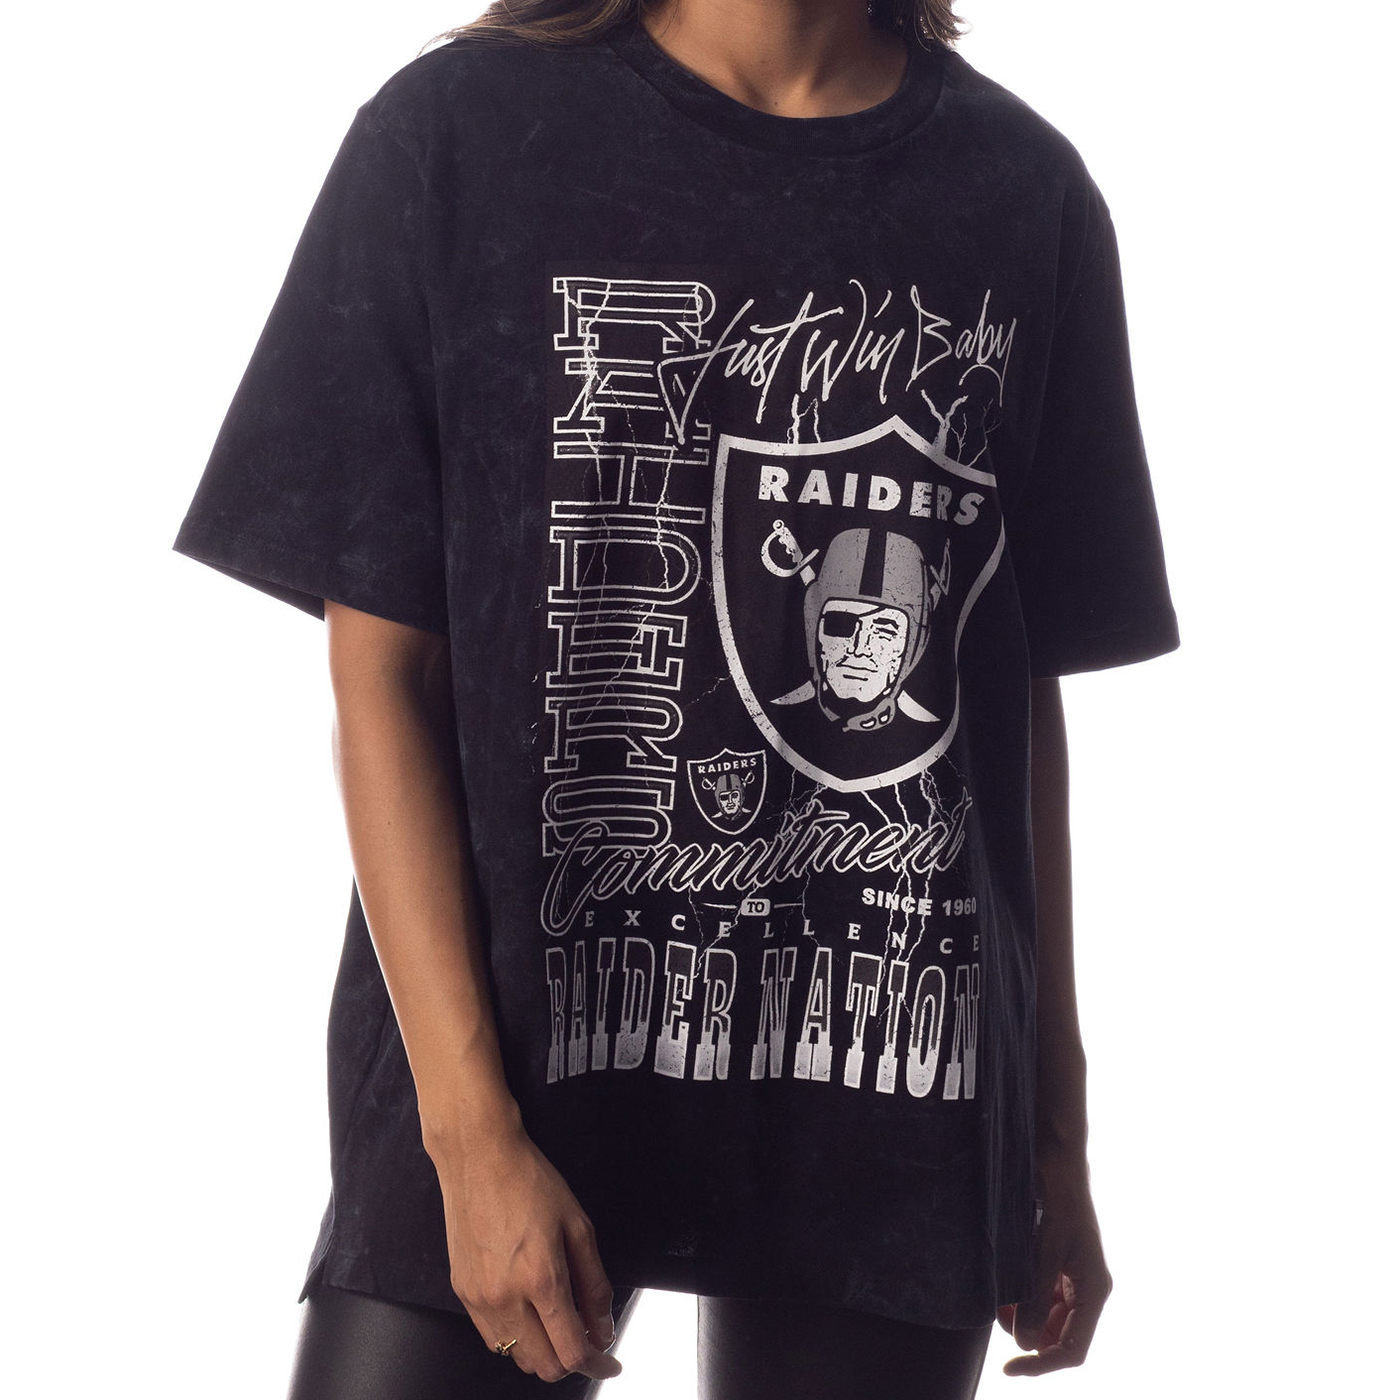 Product Detail  MAUI RAIDERS RELIEF TEE - Black - S